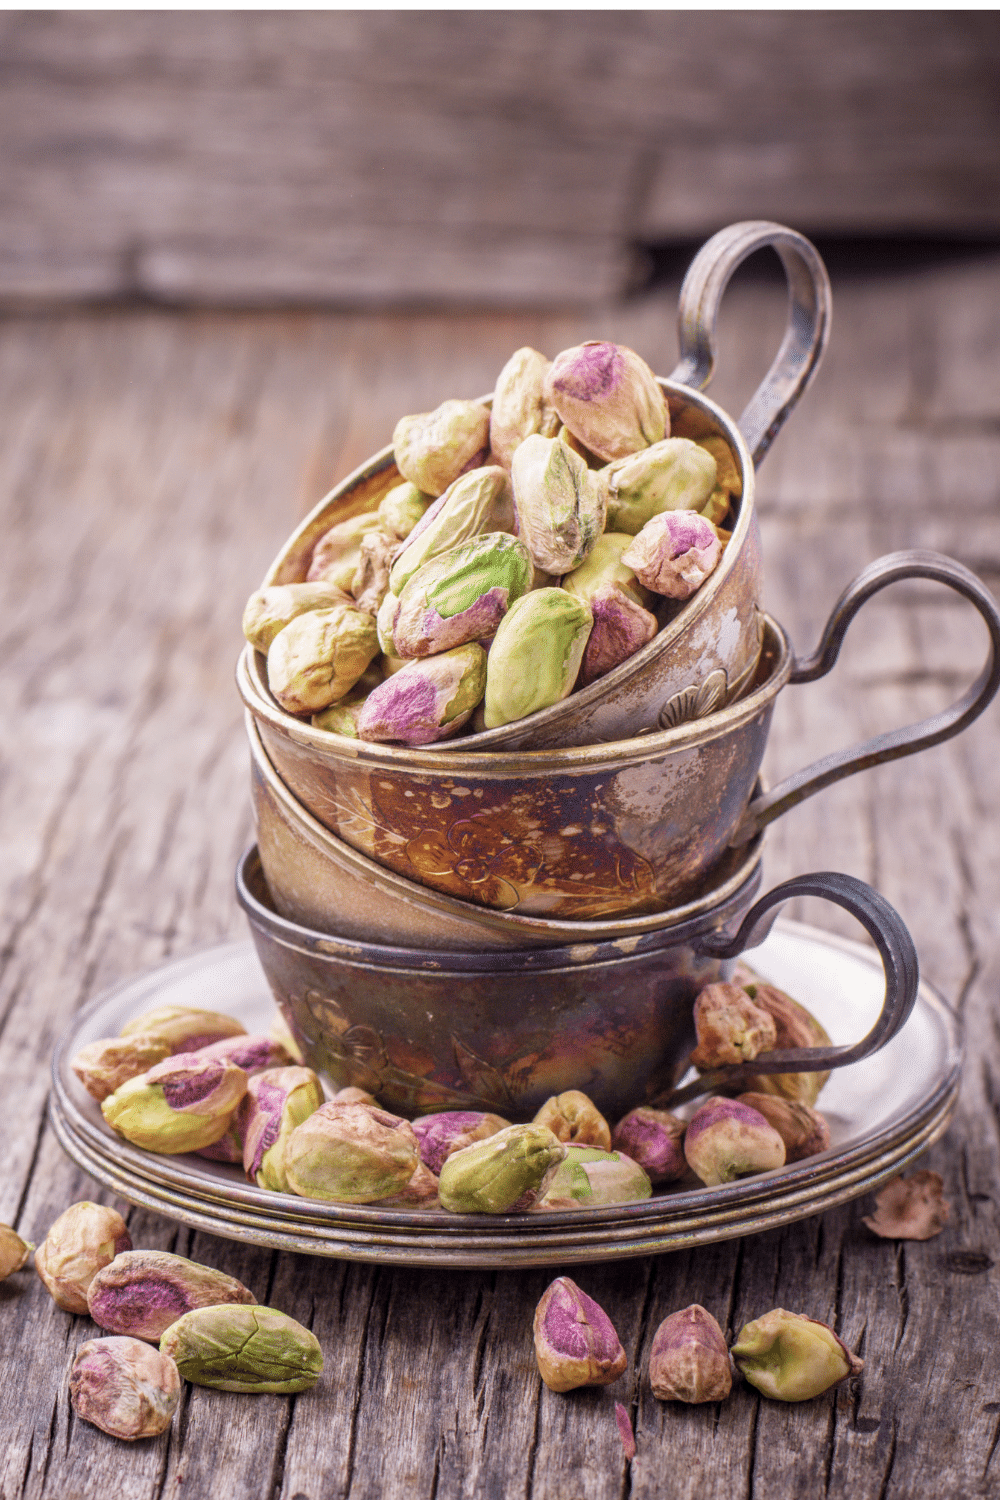 Indulge In The Savory Taste Of Smoked Pistachios